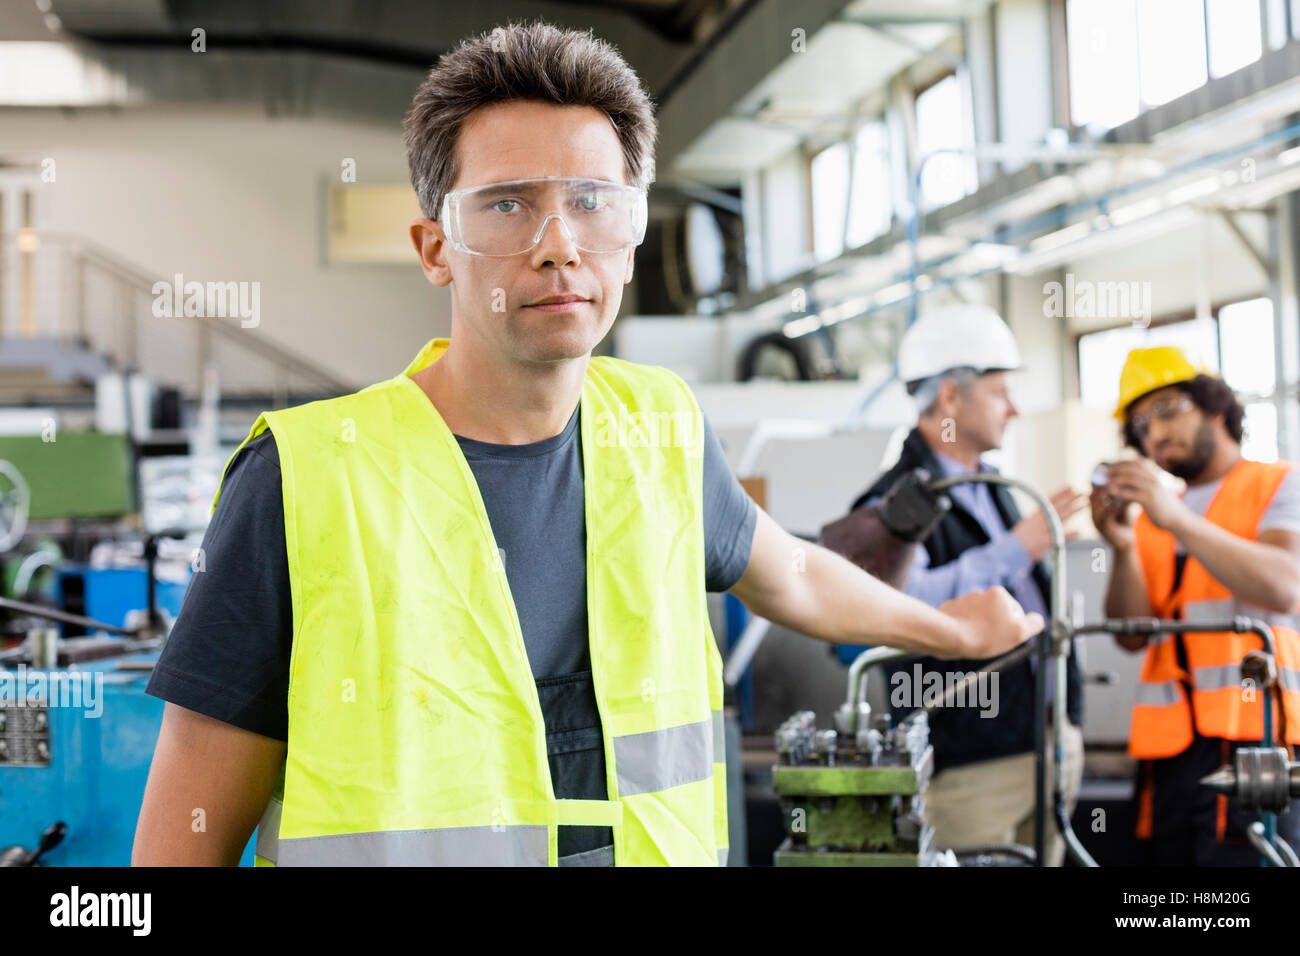 Portrait of mid adult worker wearing protective eyewear with colleagues in background at industry Stock Photo